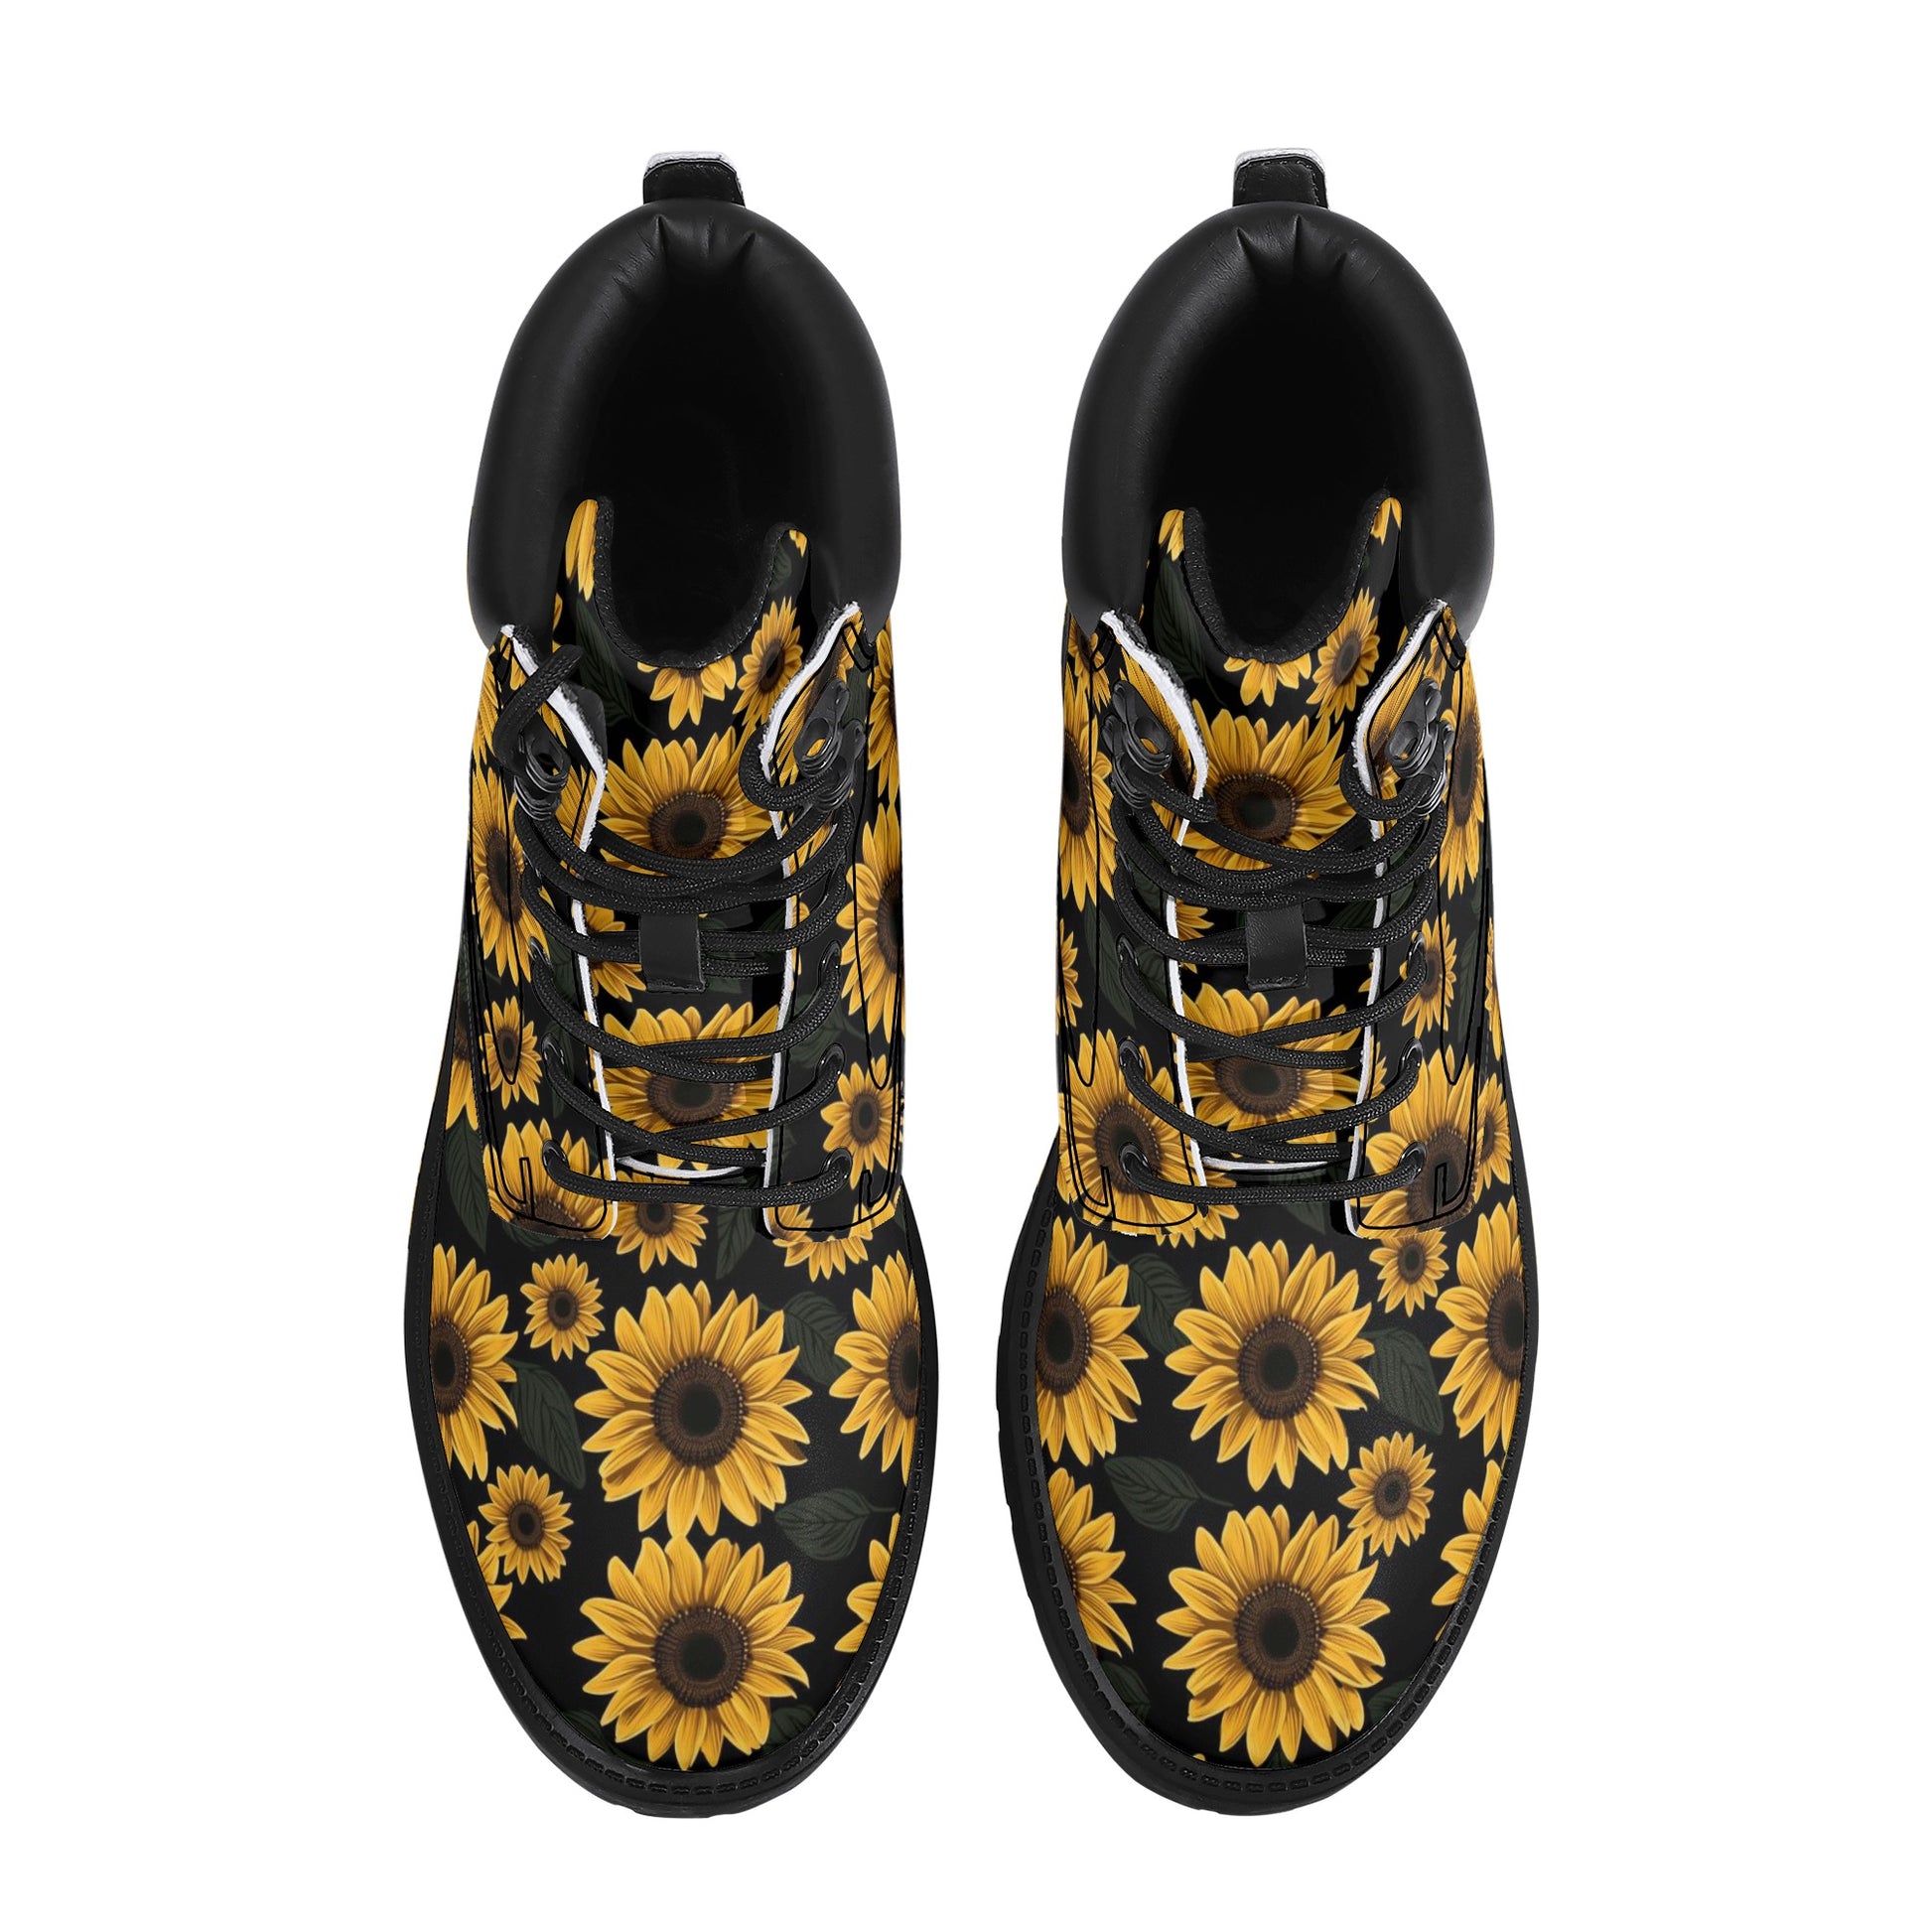 Sunflower Women Leather Boots, Yellow Flowers Floral Vegan Lace Up Shoes Hiking Festival Black Ankle Work Winter Waterproof Custom Ladies Starcove Fashion